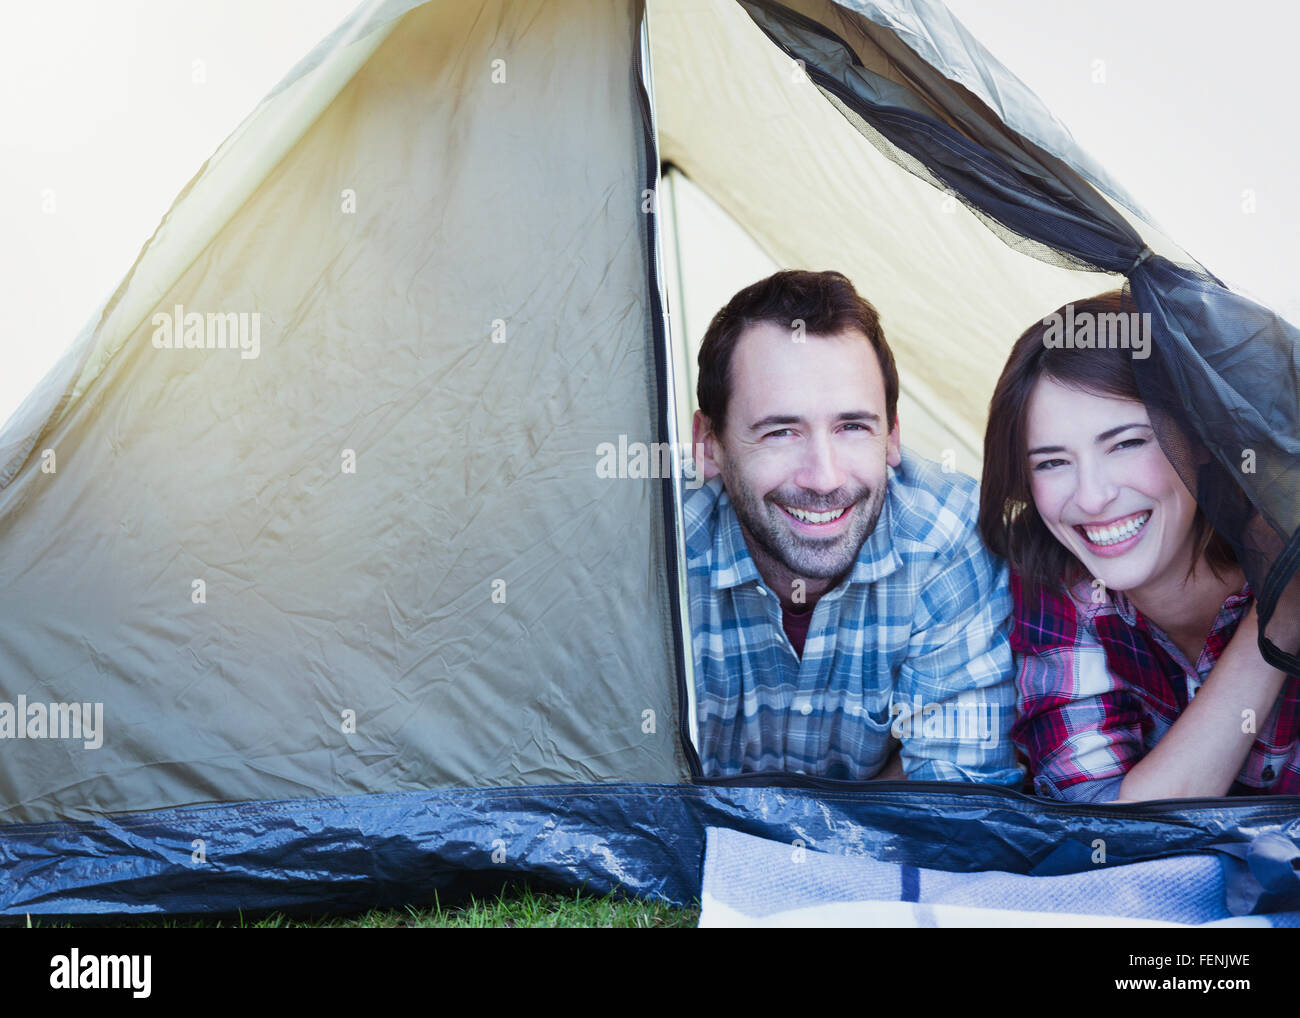 Portrait smiling couple in tent Stock Photo